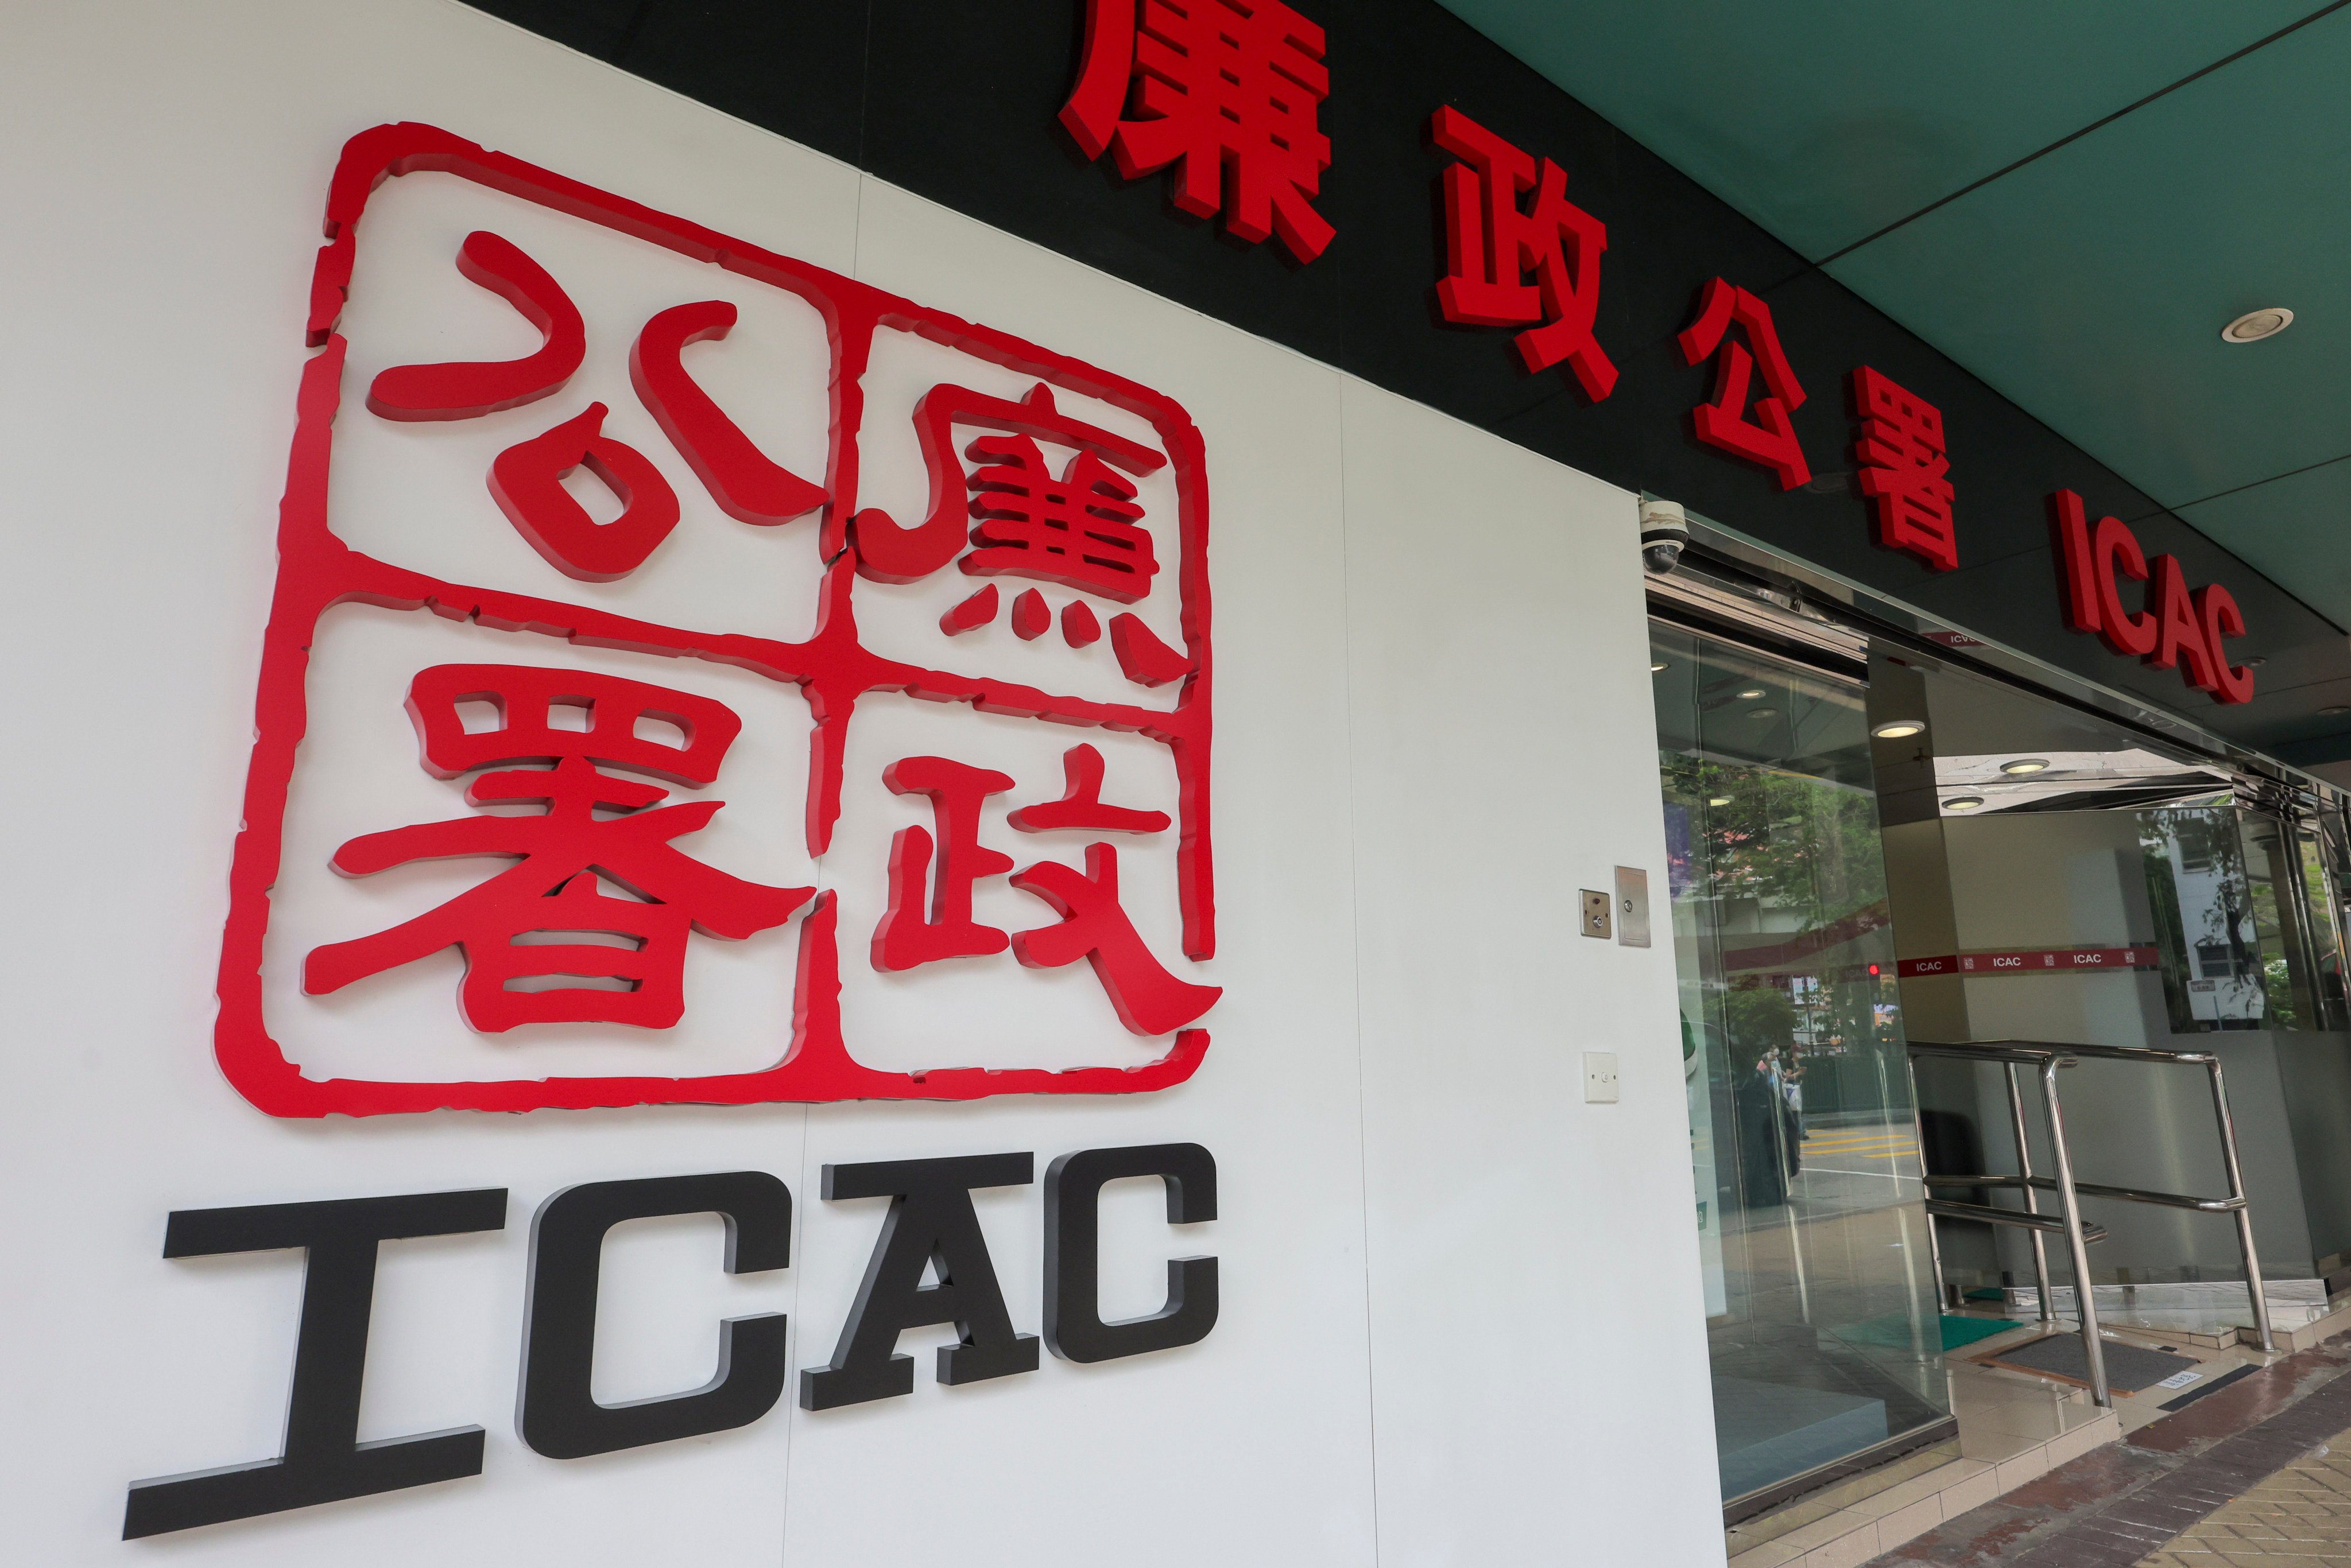 The ICAC has said its investigation is still under way and it will decide whether to pursue prosecution after seeking legal advice. Photo: Jelly Tse